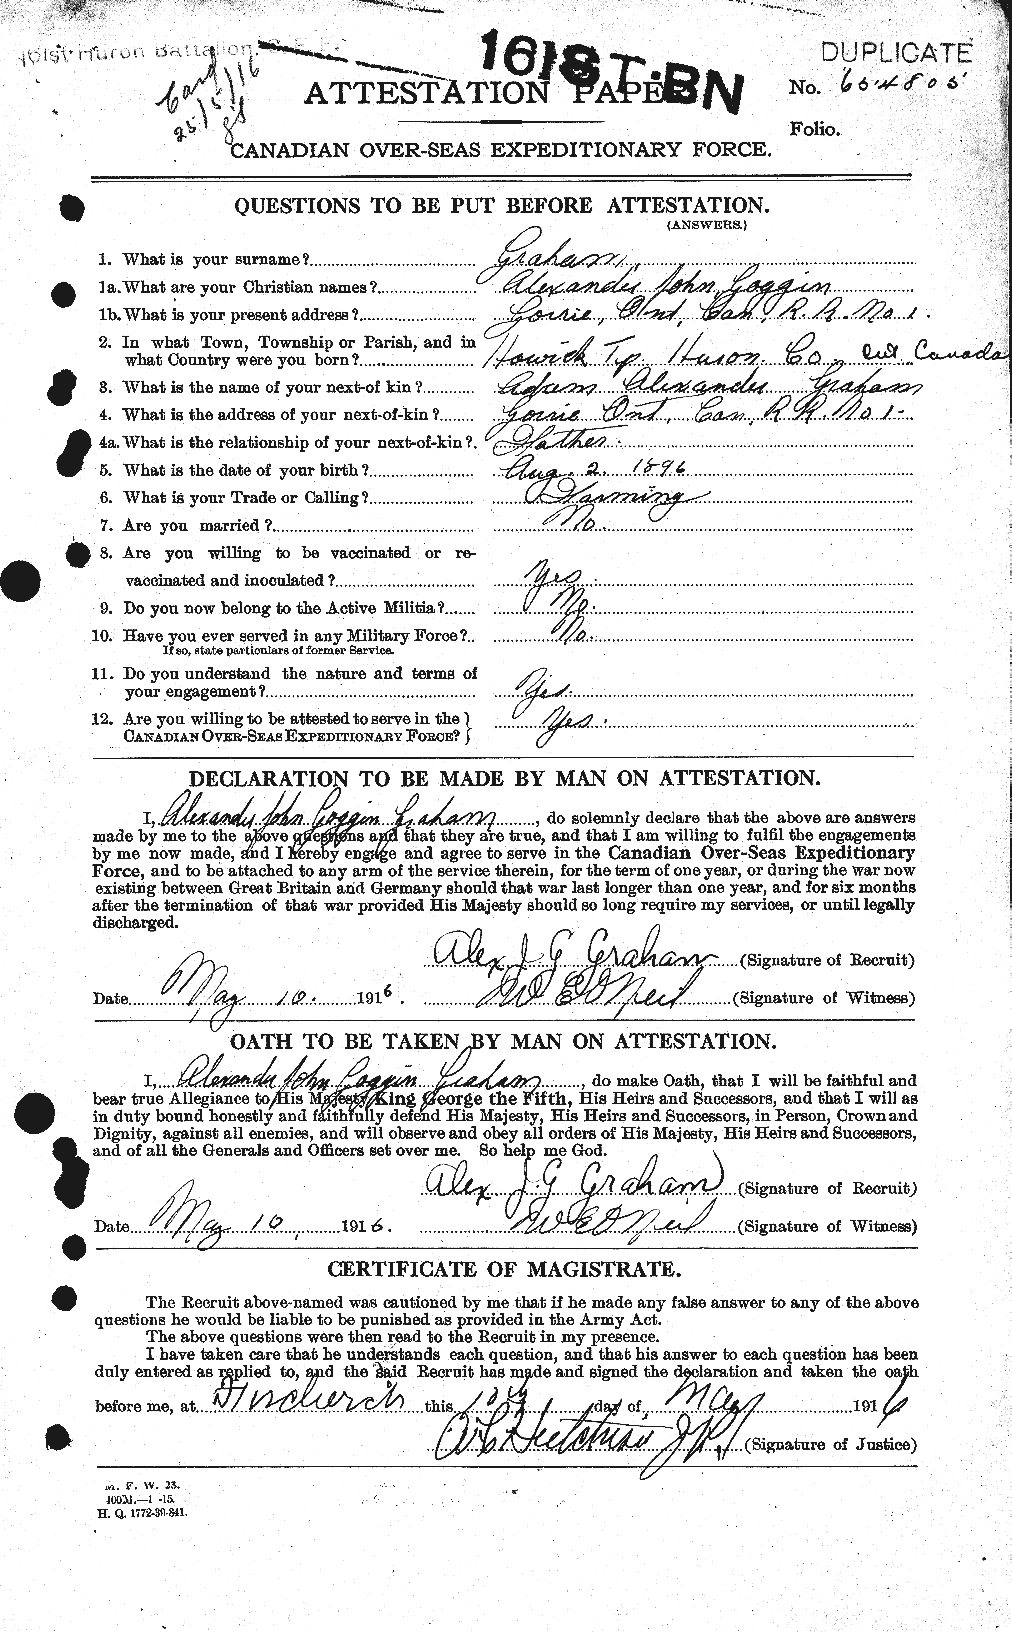 Personnel Records of the First World War - CEF 359592a